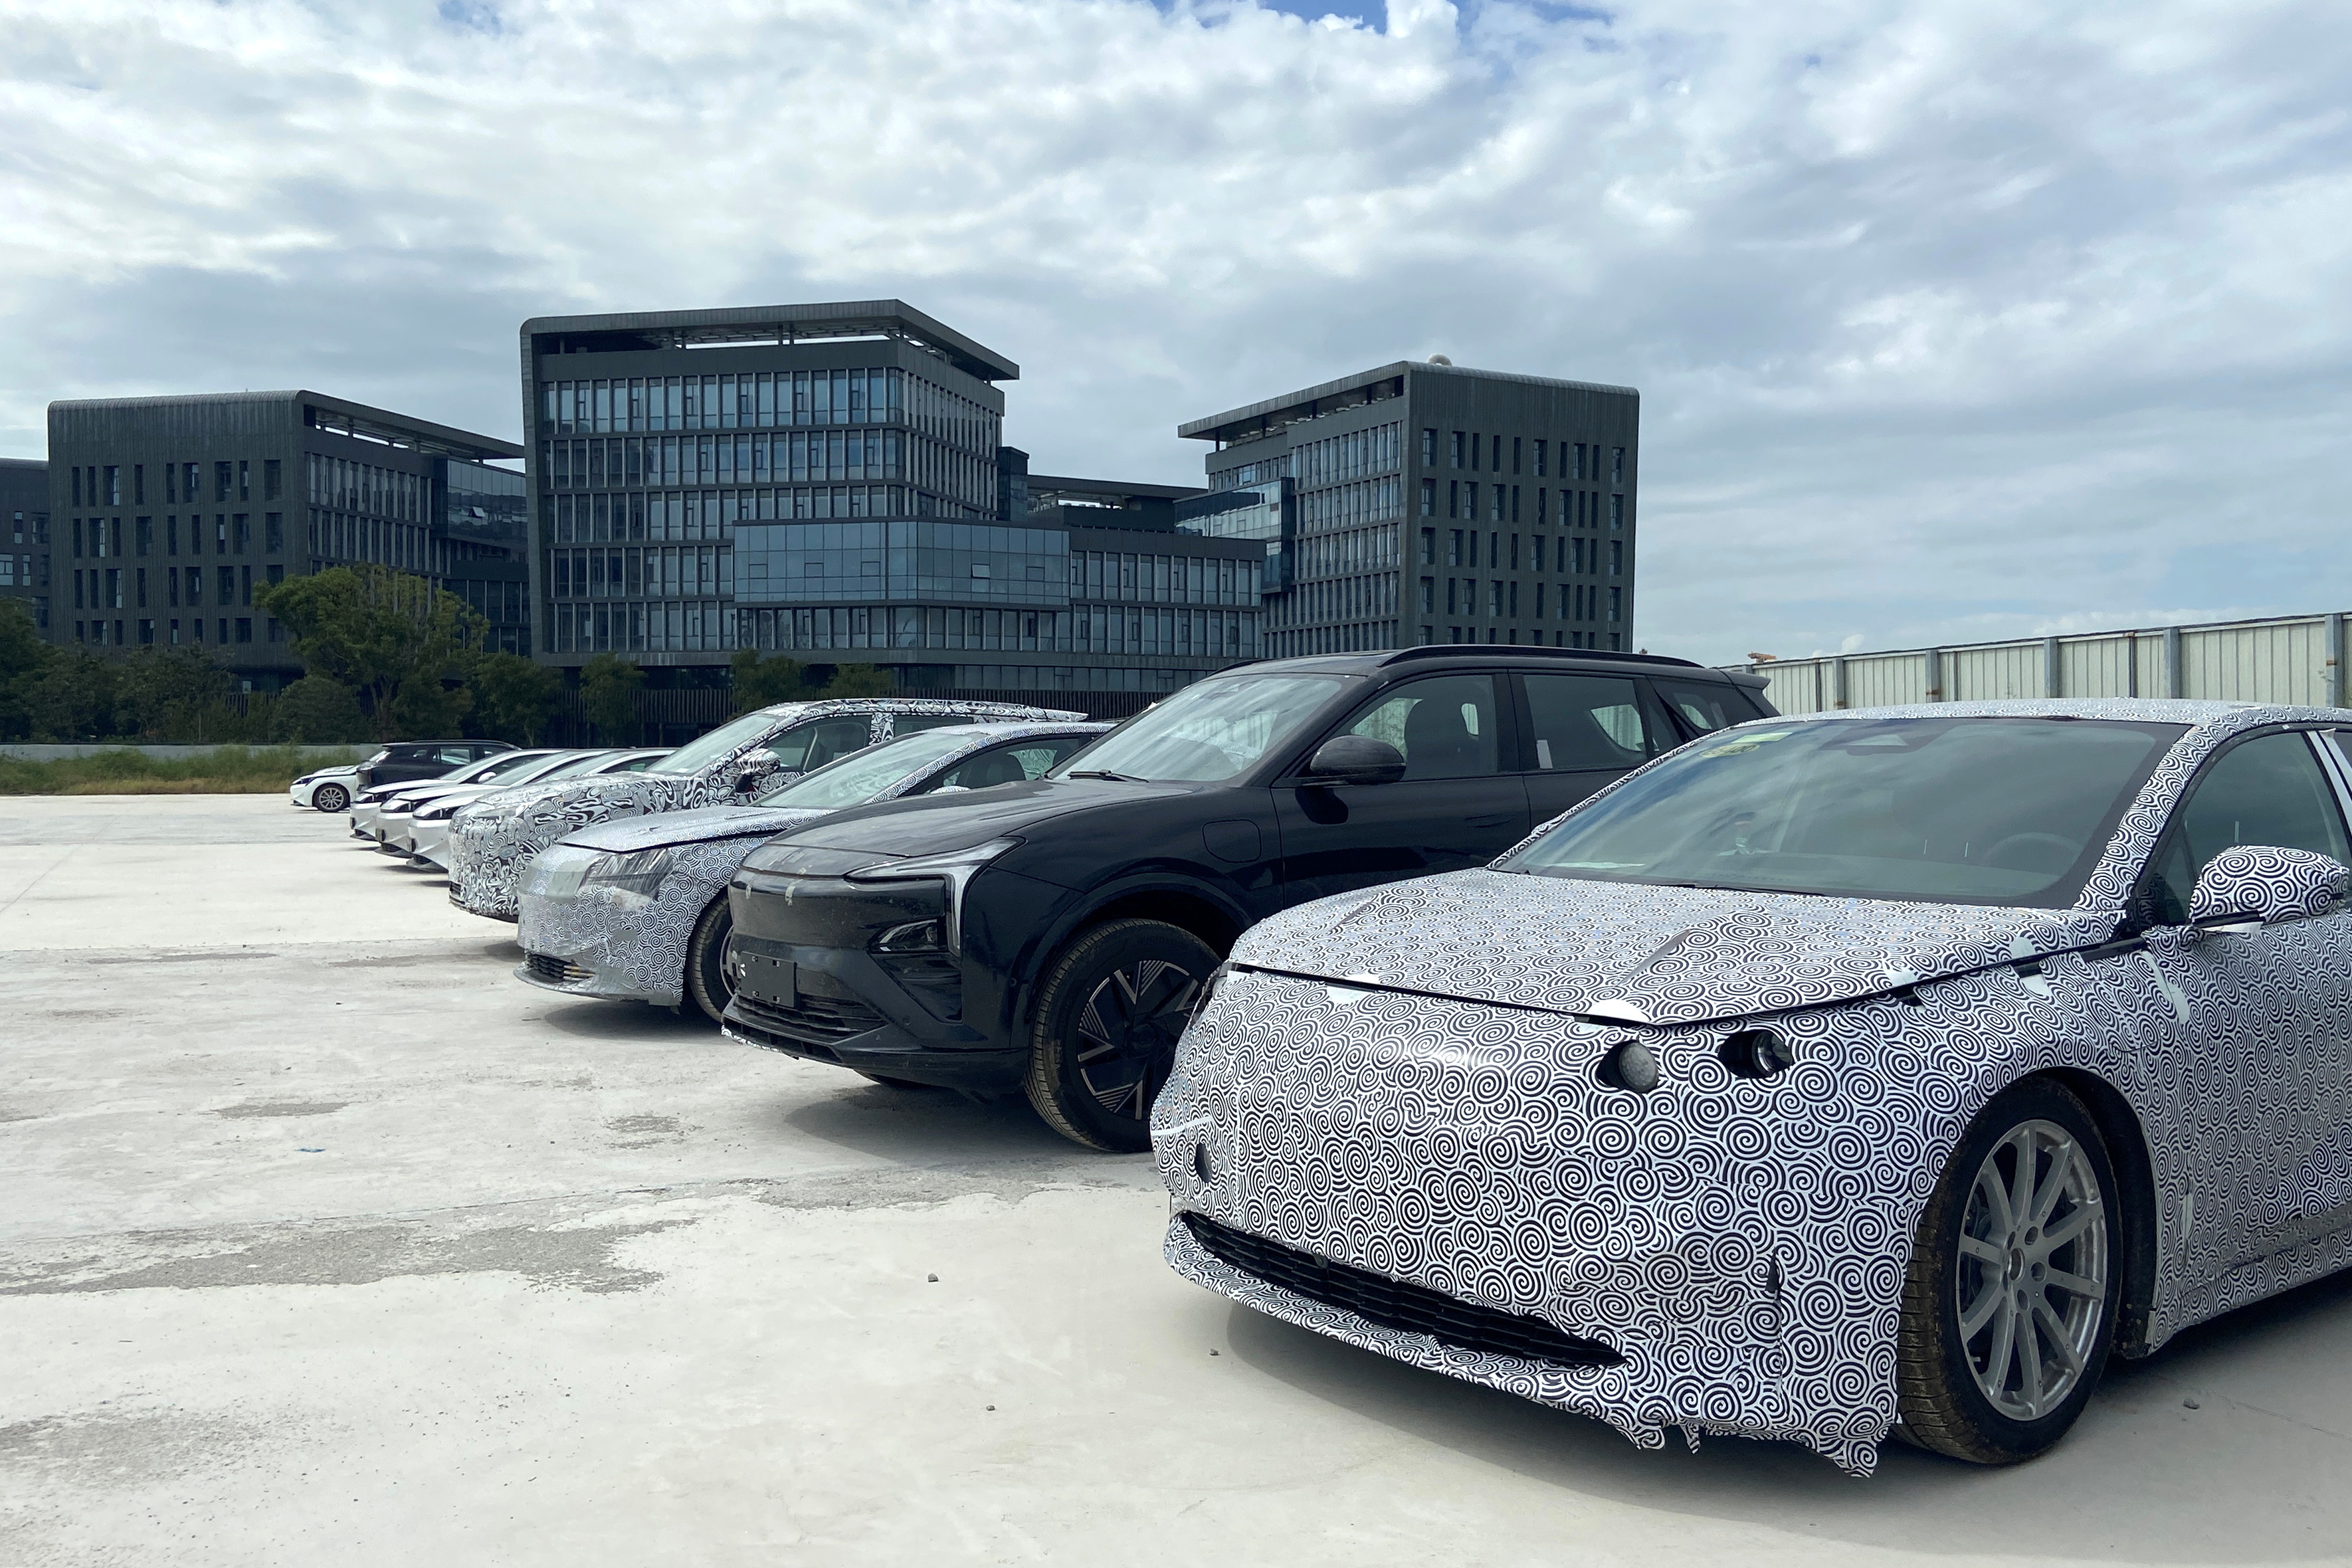 Test cars by Evergrande are parked outside the Evergrande NEV's research center in Shanghai